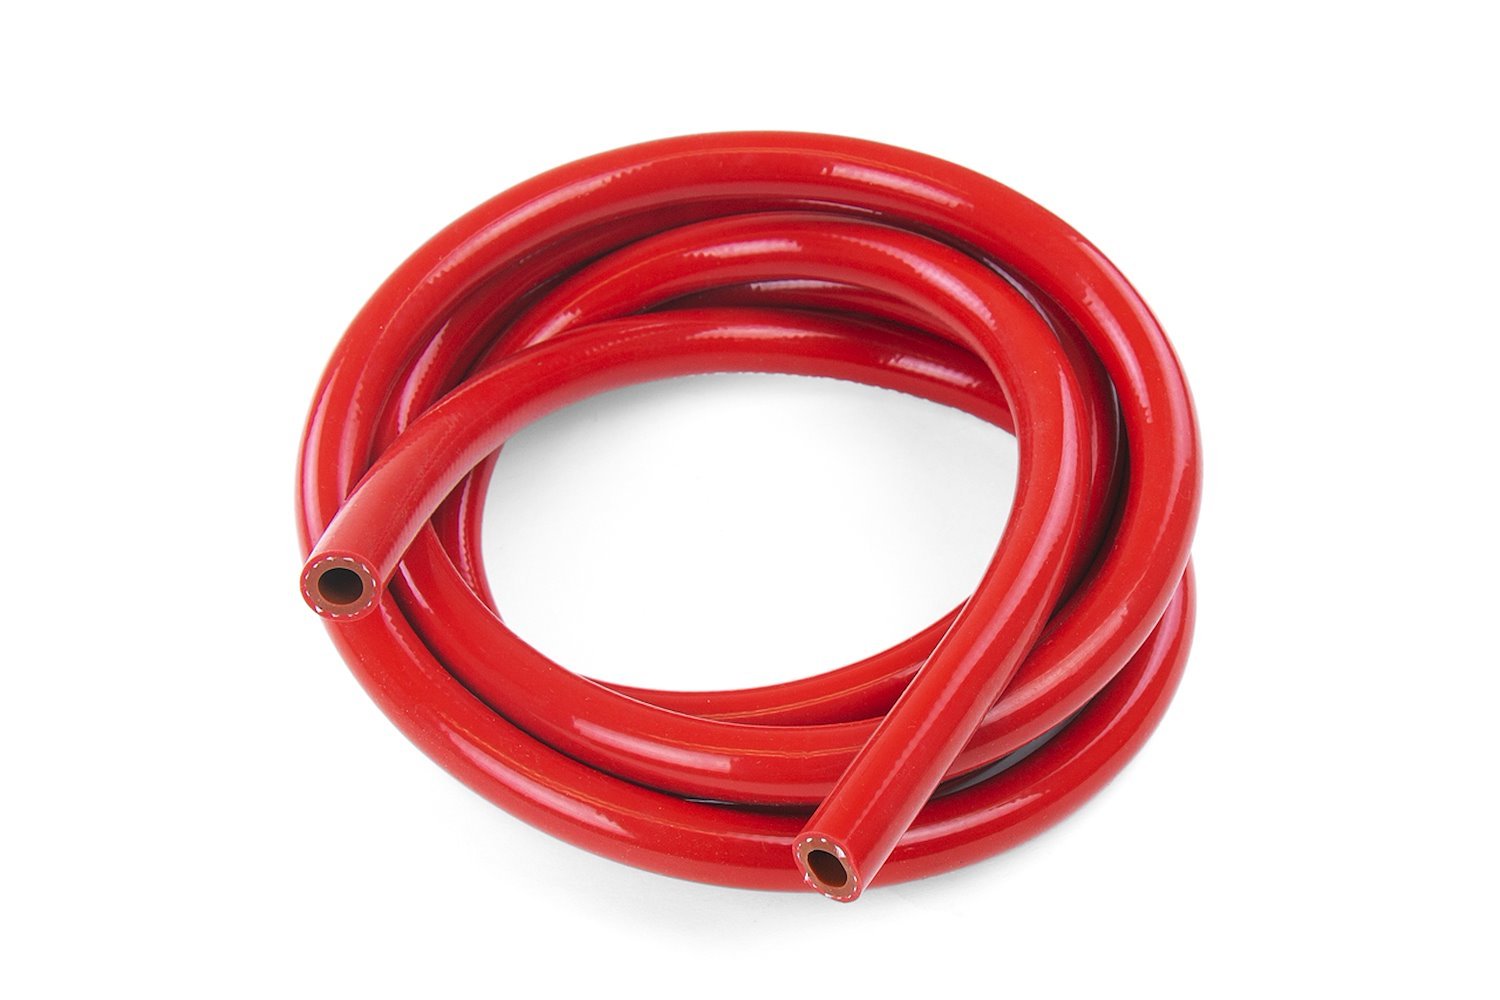 HTHH-025-REDx10 Silicone Heater Hose Tubing, High-Temp 1-Ply Reinforced, 1/4 in. ID, 10 ft. Roll, Red